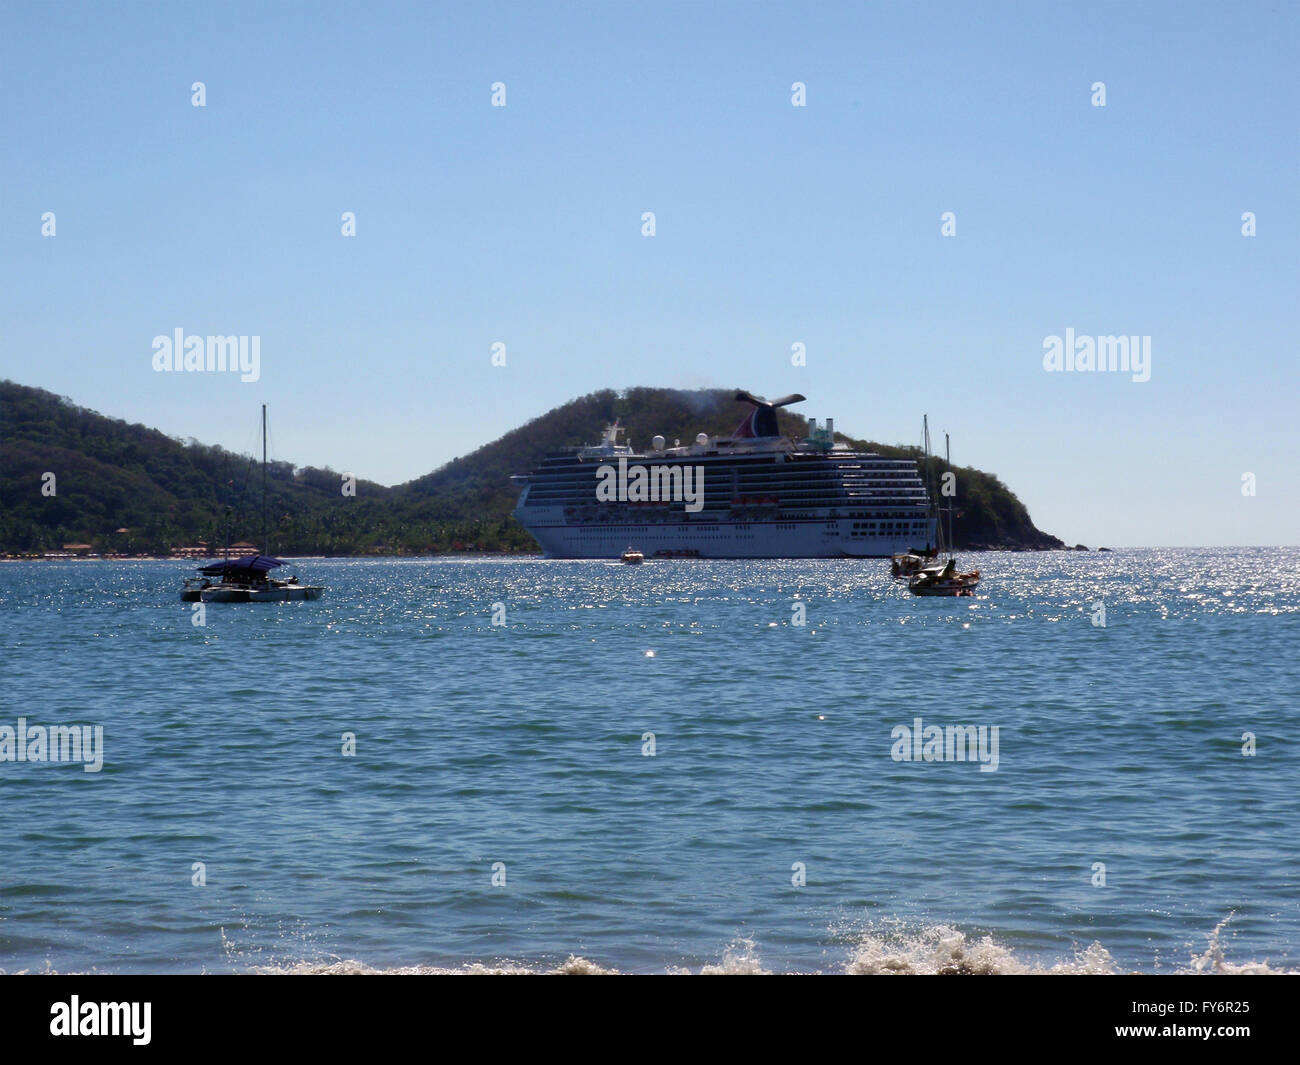 ZIHUATANEJO, MEXICO - JANUARY 10: Carnival Cruise ship rests in bay with small boats in forground during port of call stop in Zi Stock Photo